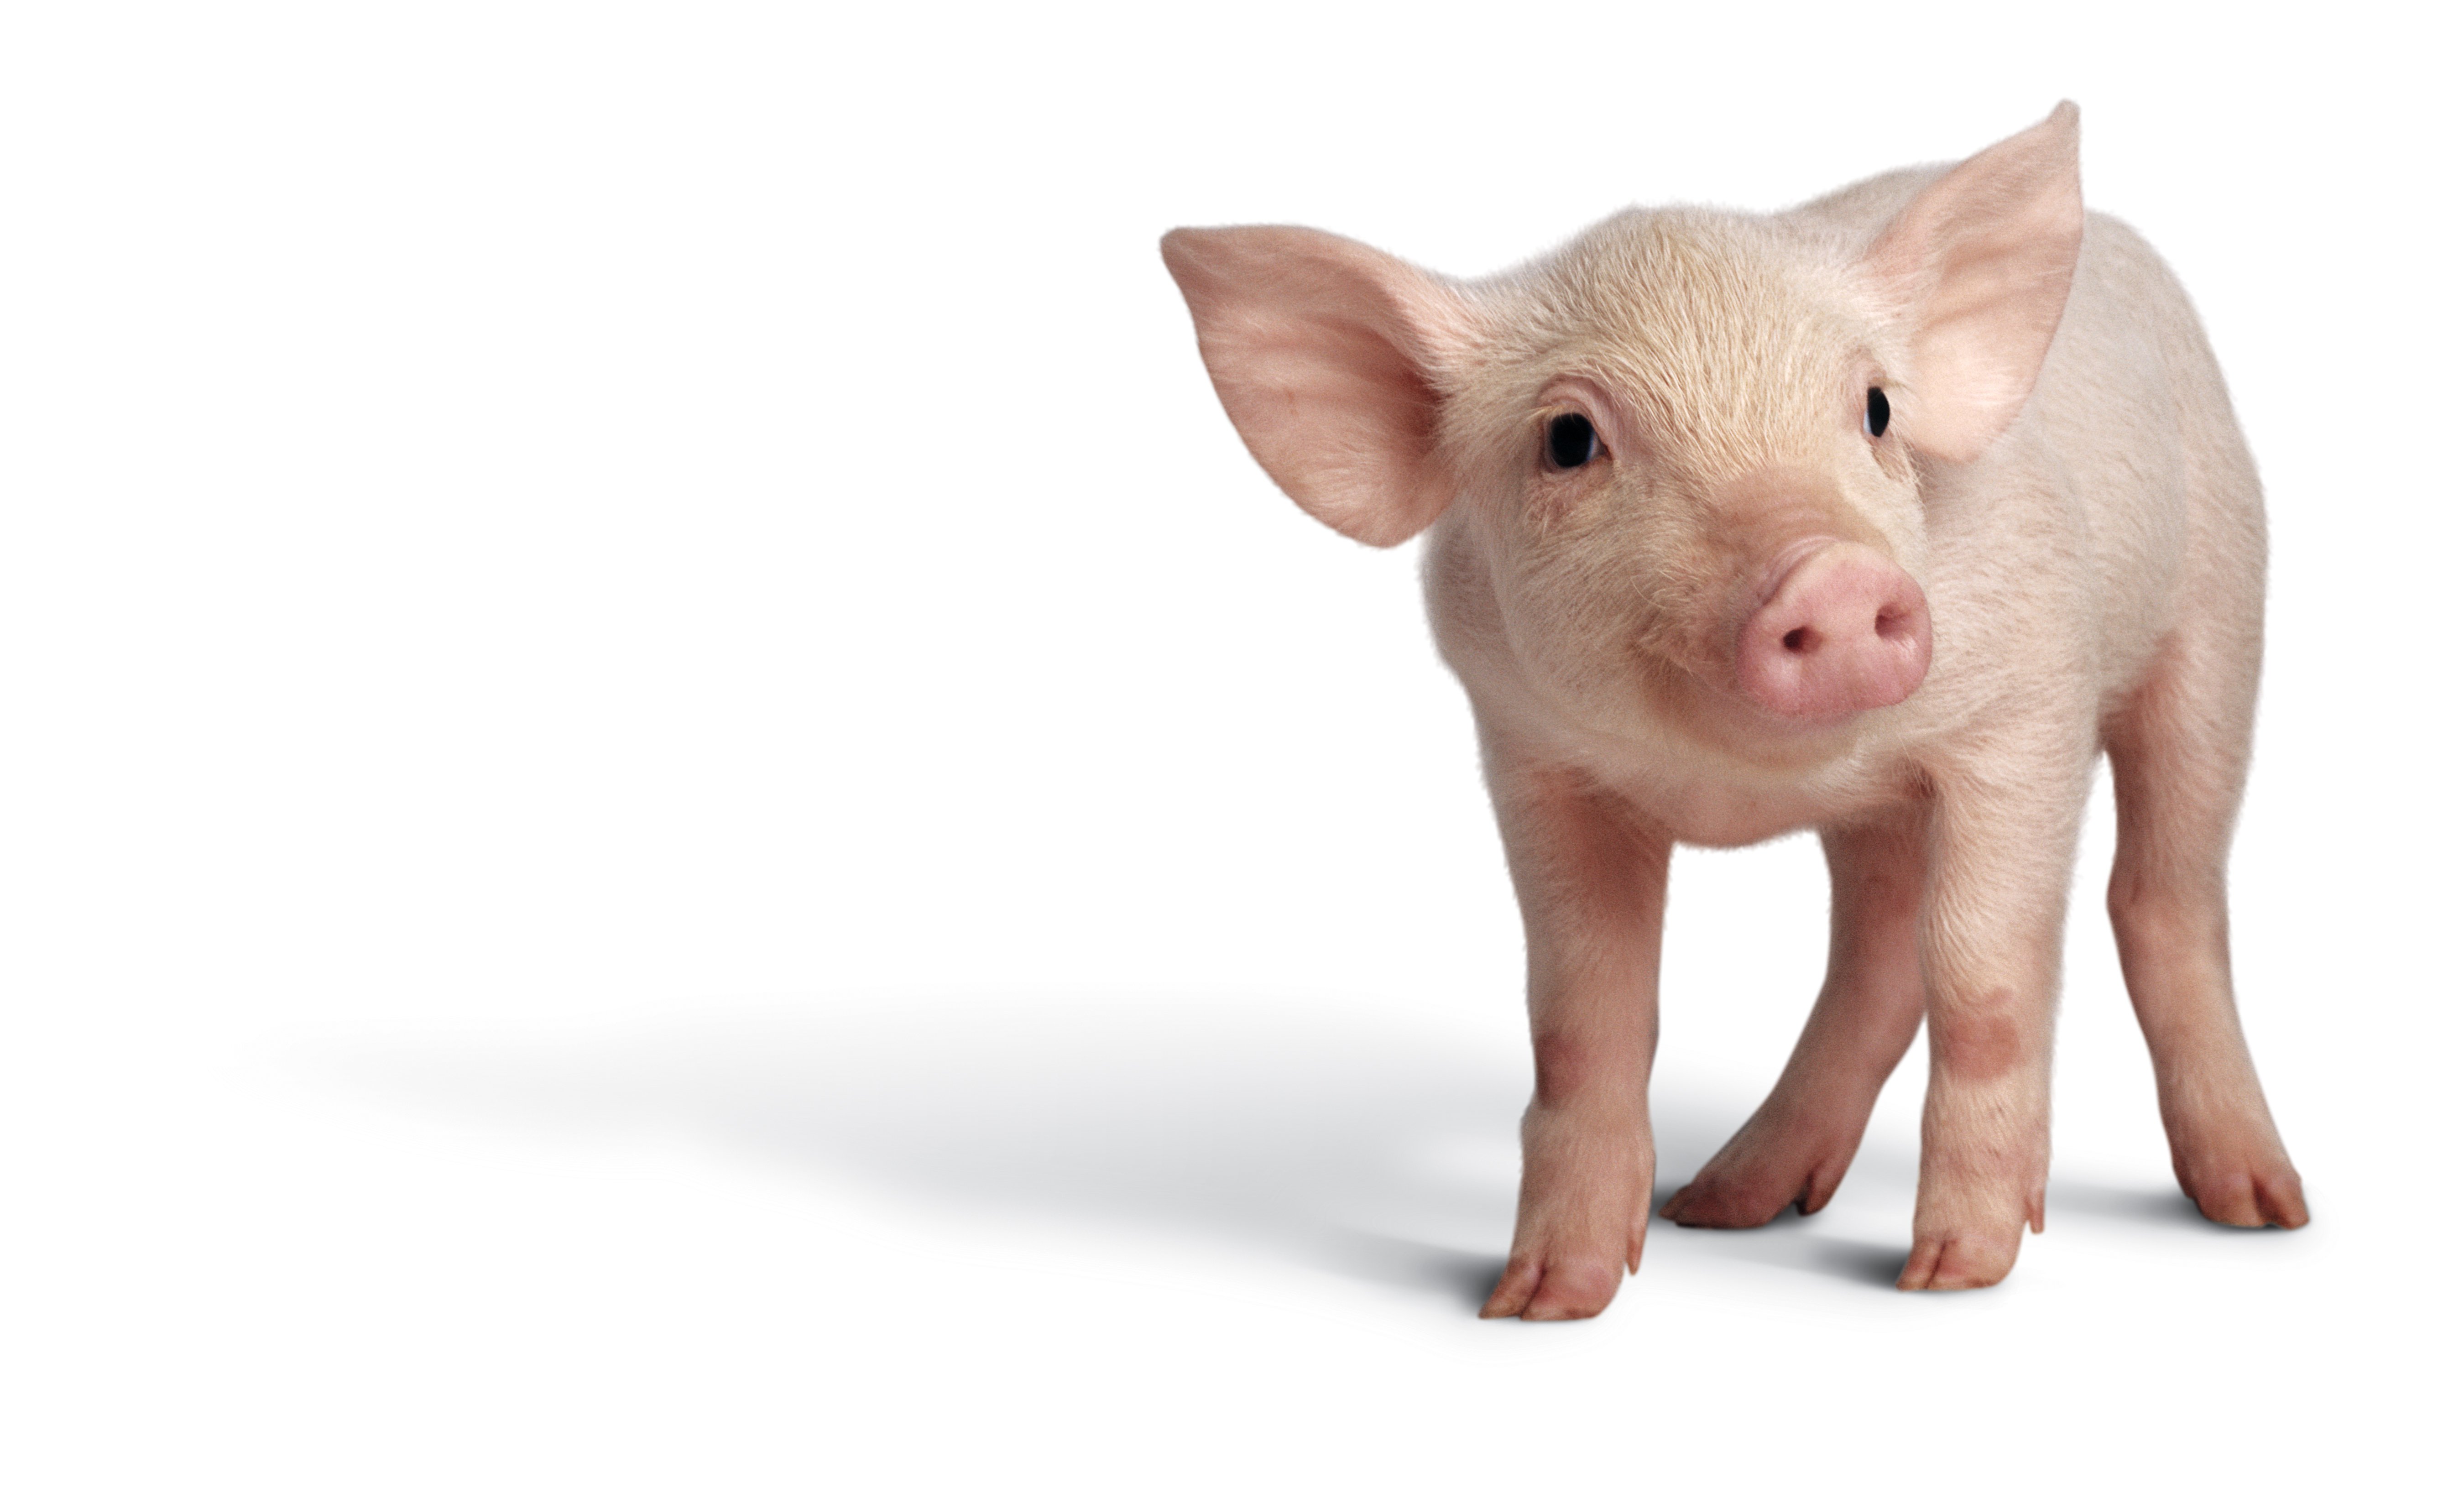 Piglets Are Now Being Used to Combat Student Stress | Time